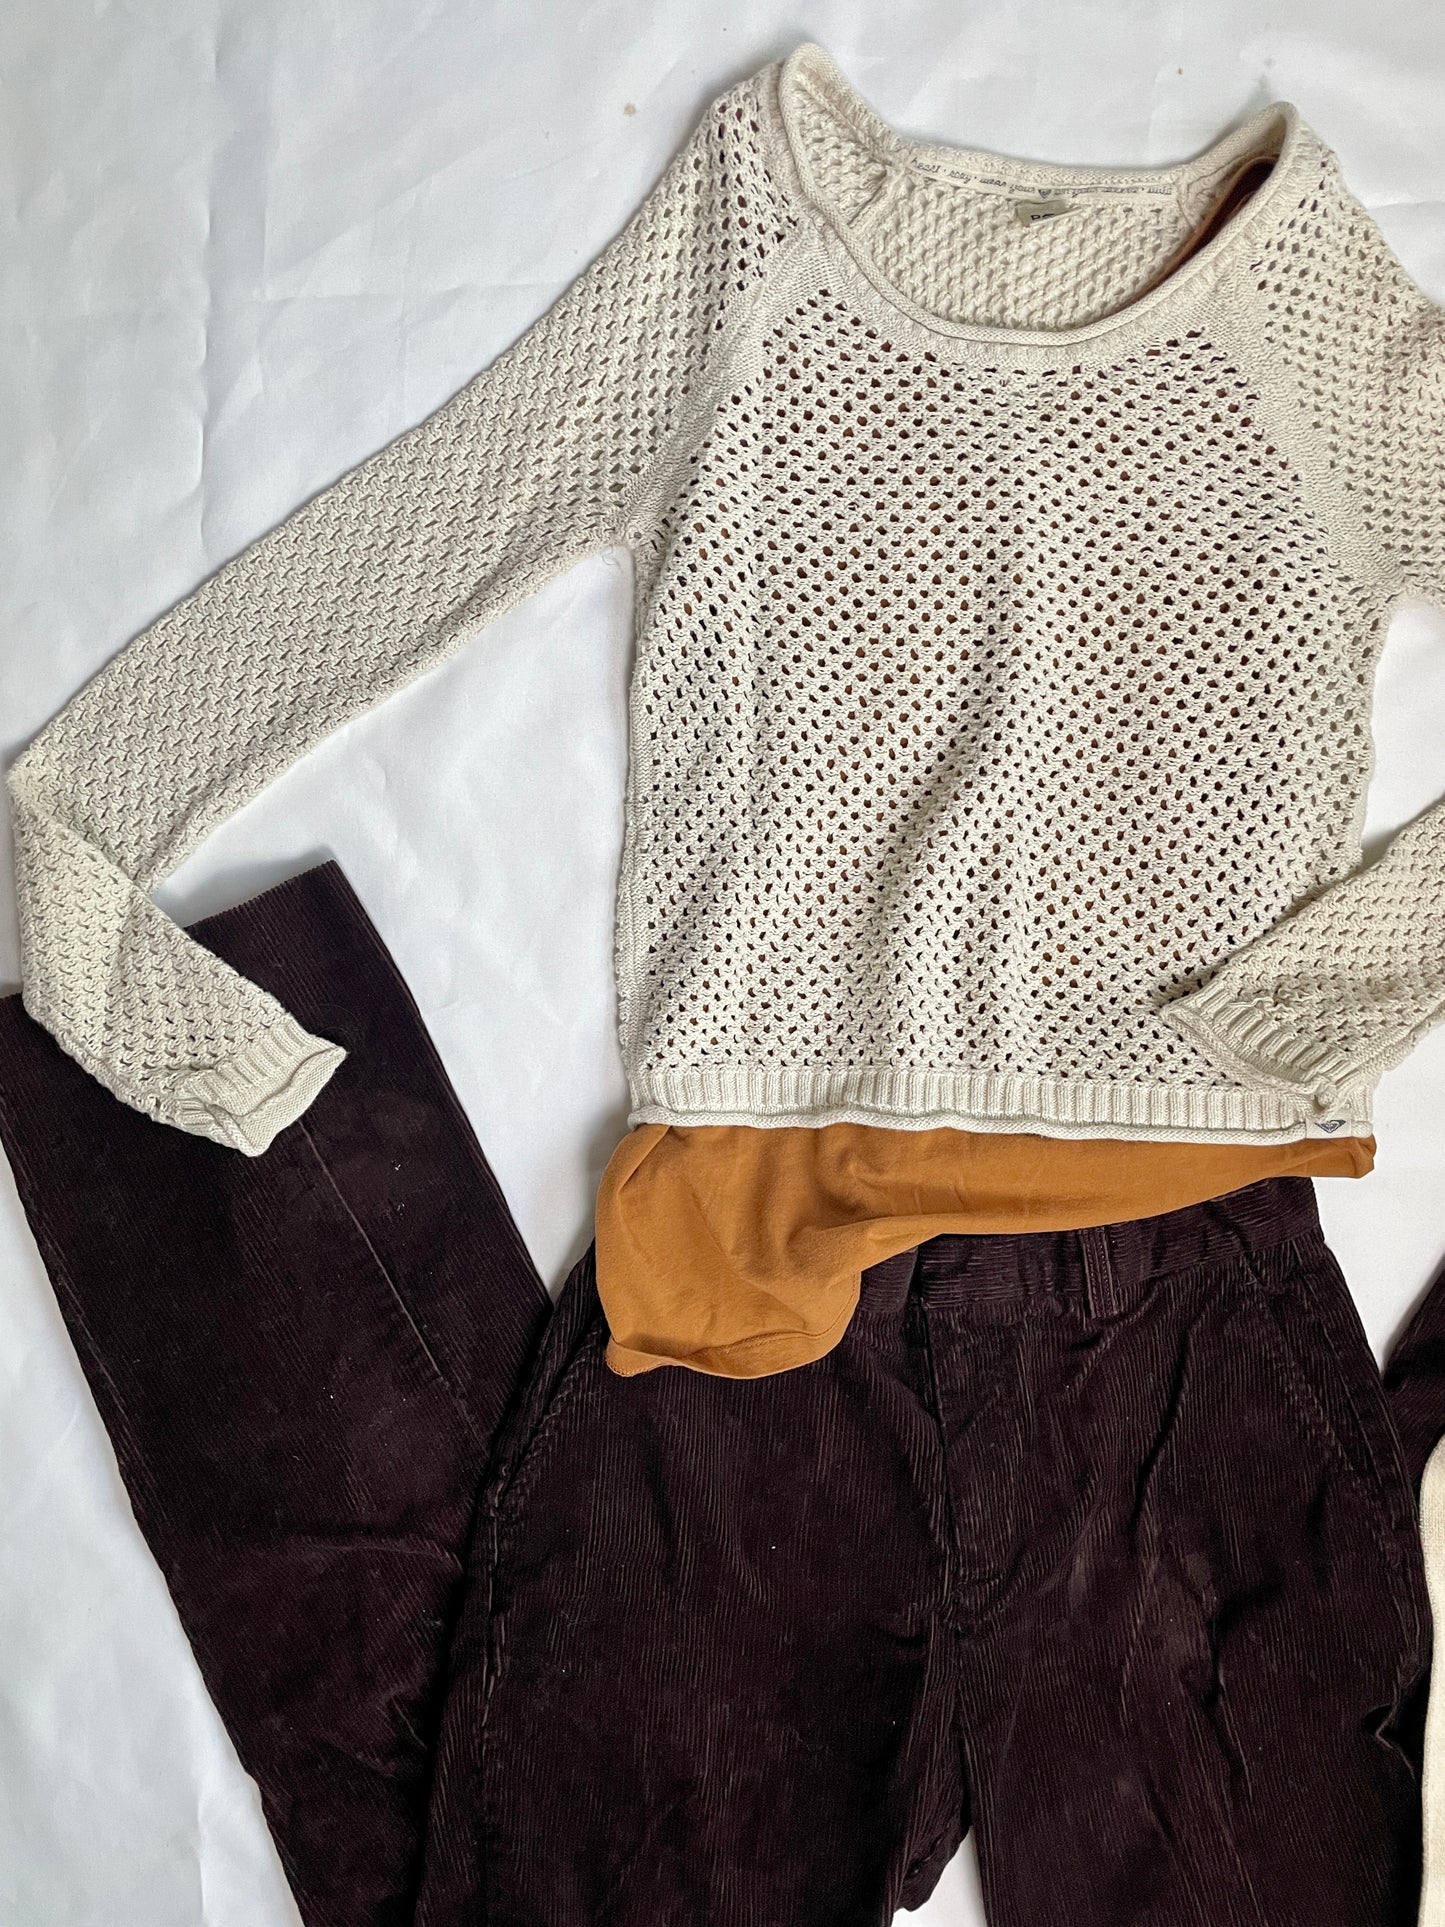 FALL inspired outfit bundle - sweater + tank top + corduroy pants + bag